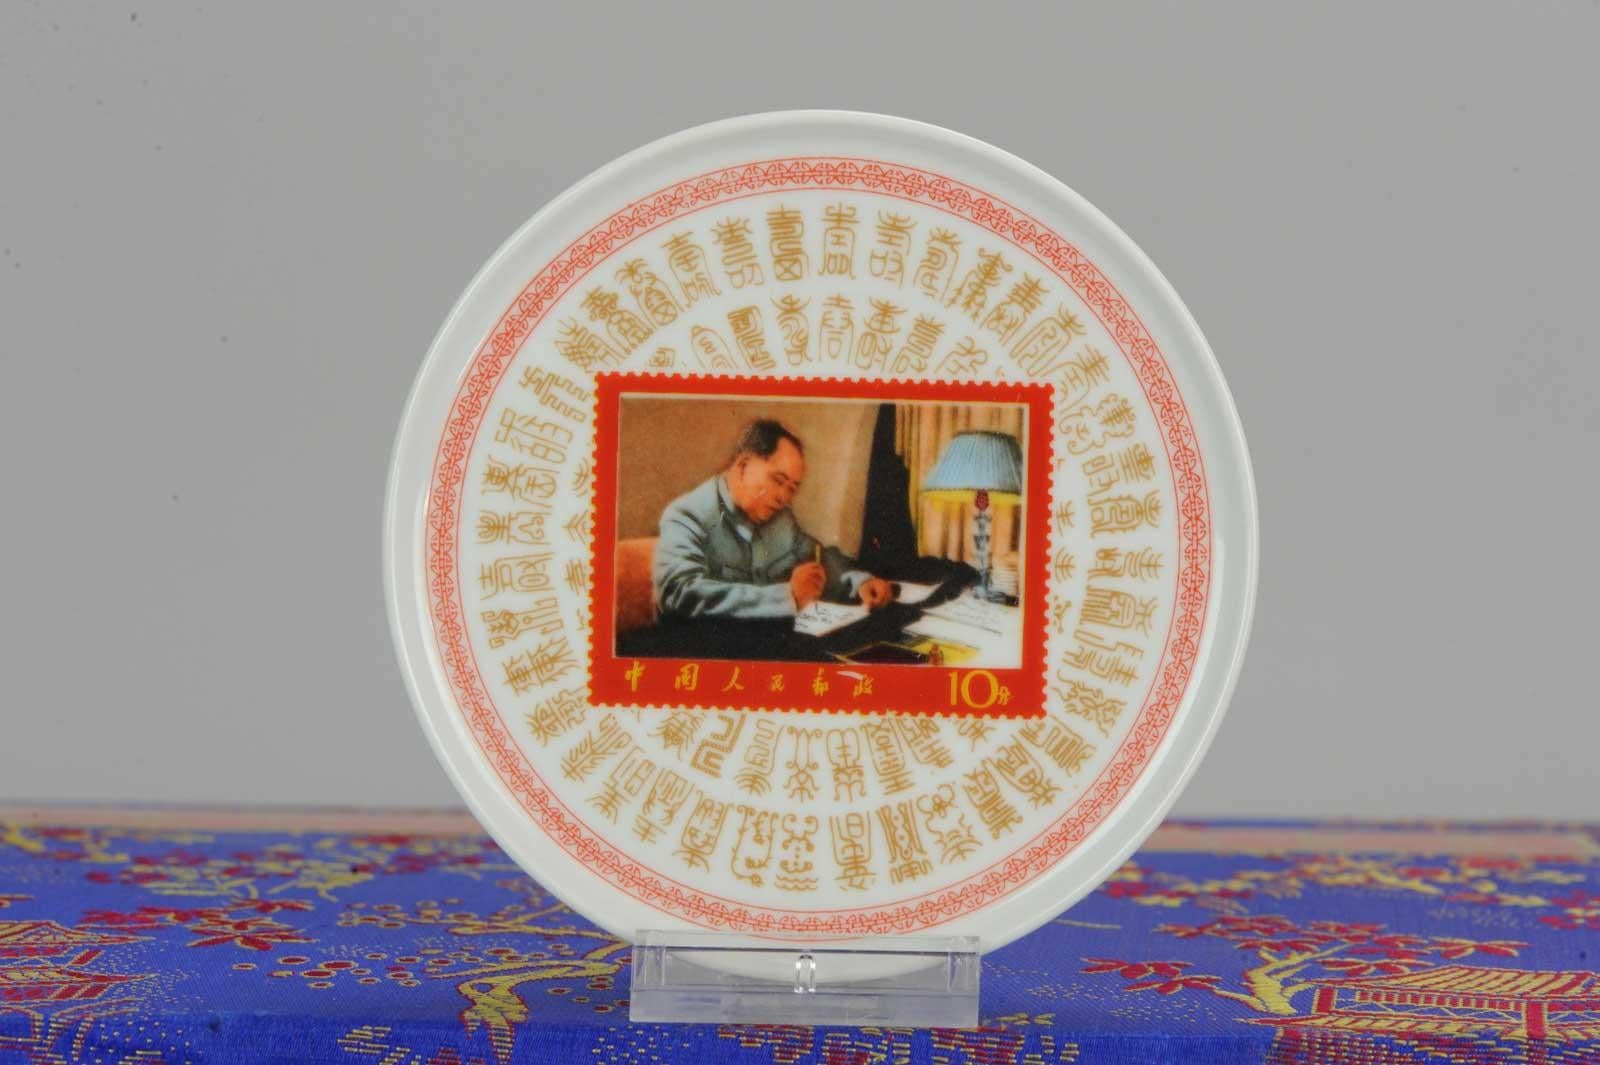 Set of 14 Chinese Porcelain Plate with Mao 100 Years Stamps Dishes, 1996 In Good Condition For Sale In Amsterdam, Noord Holland